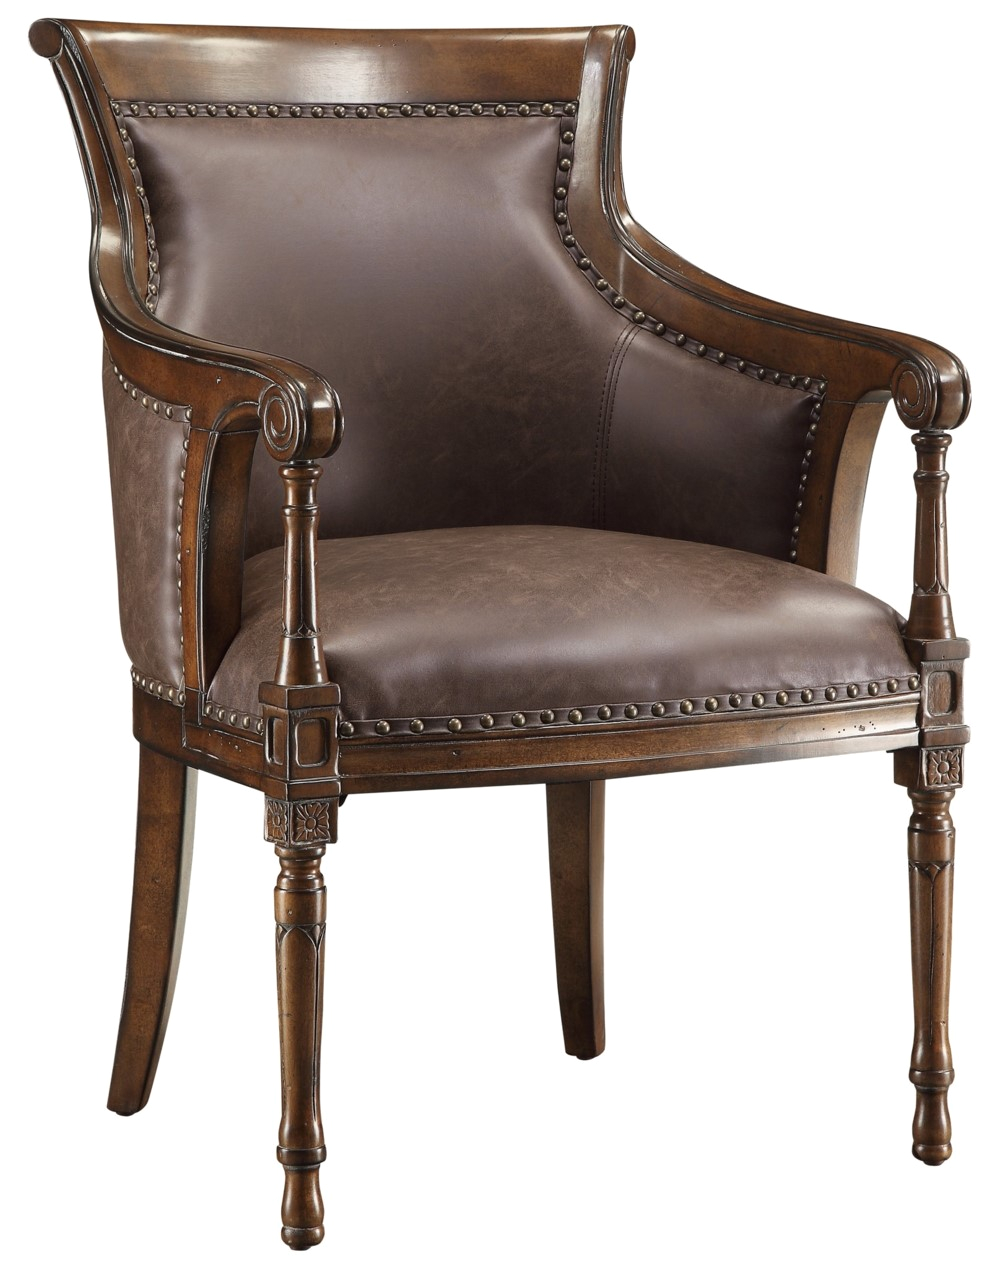 Wood and Leather Accent Chair Rich Vintage Style Accent Arm Club Chair Leather Seat